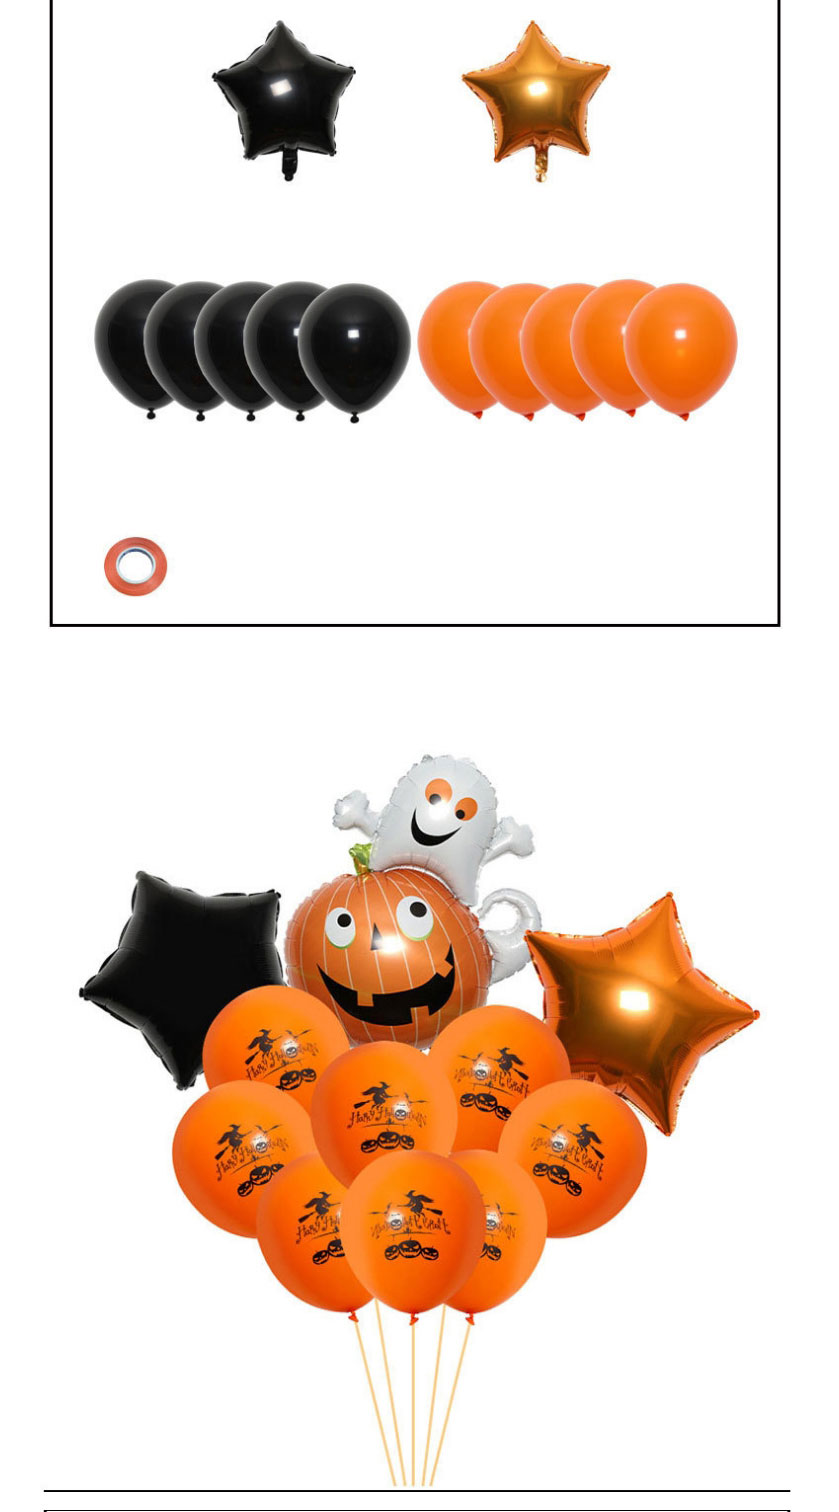 Fashion Balloon Combination 4 Halloween Printing Thickened Balloon Set,Festival & Party Supplies